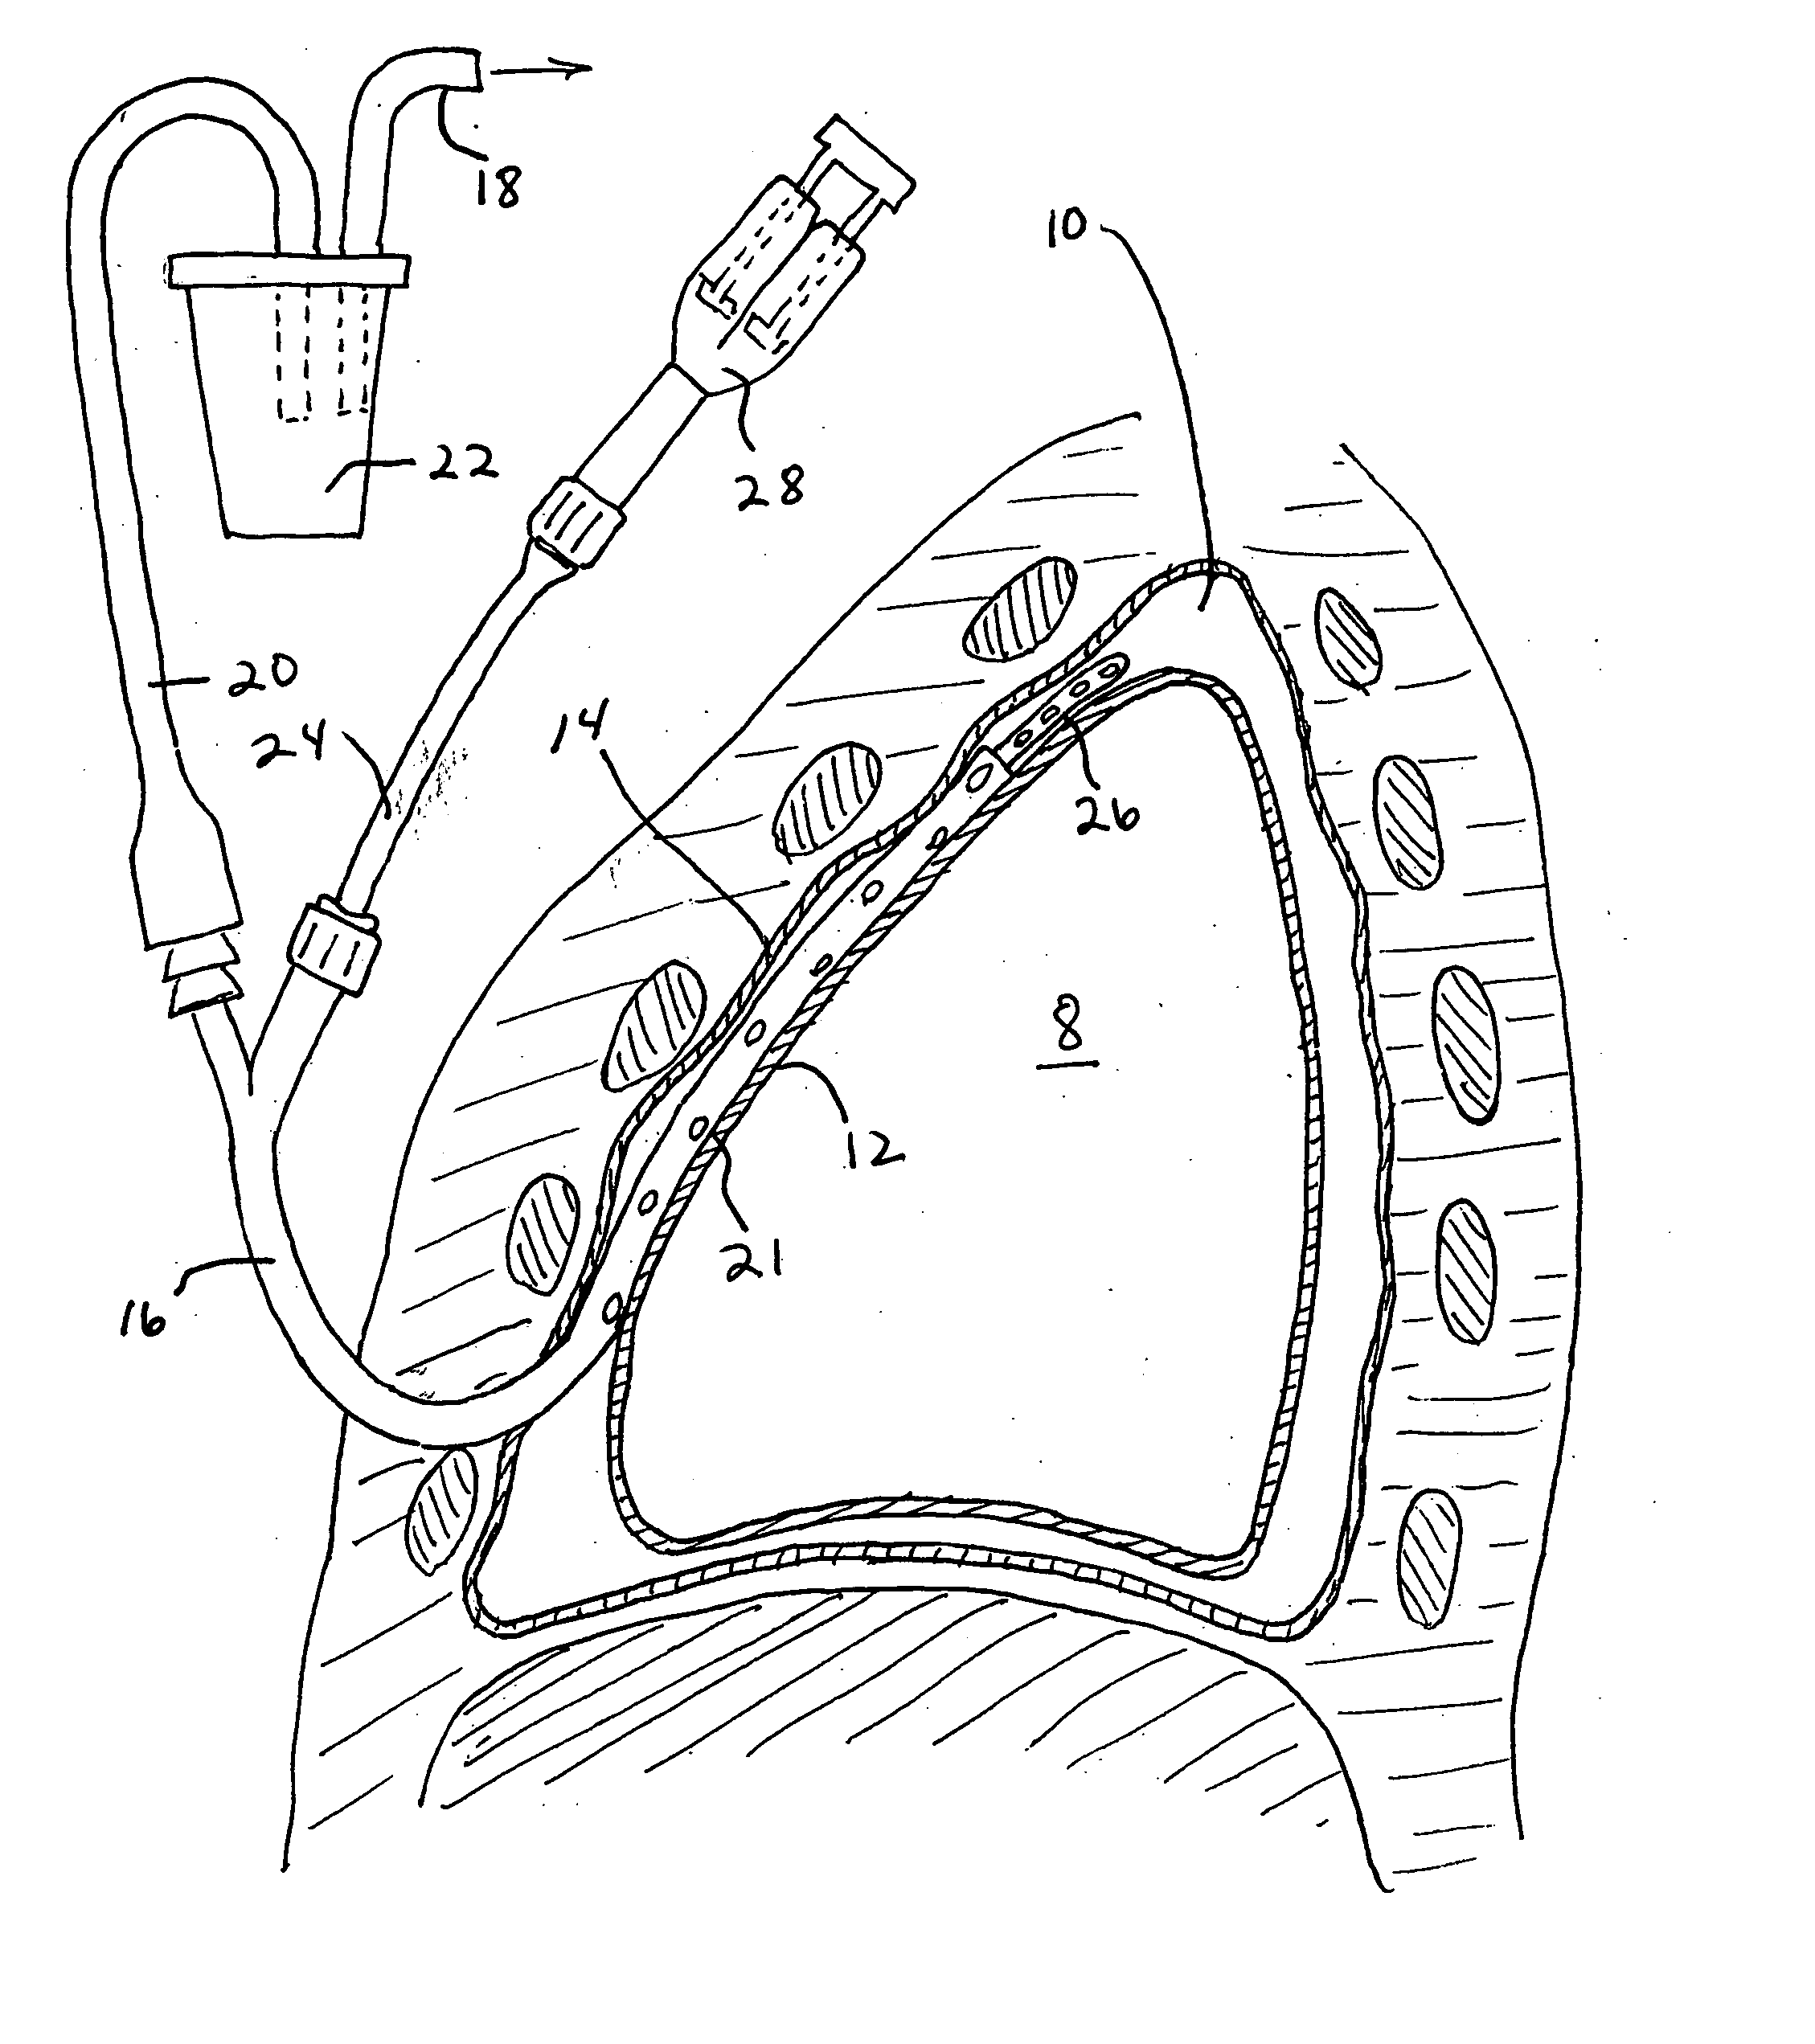 Pleural effusion treatment device, method and material